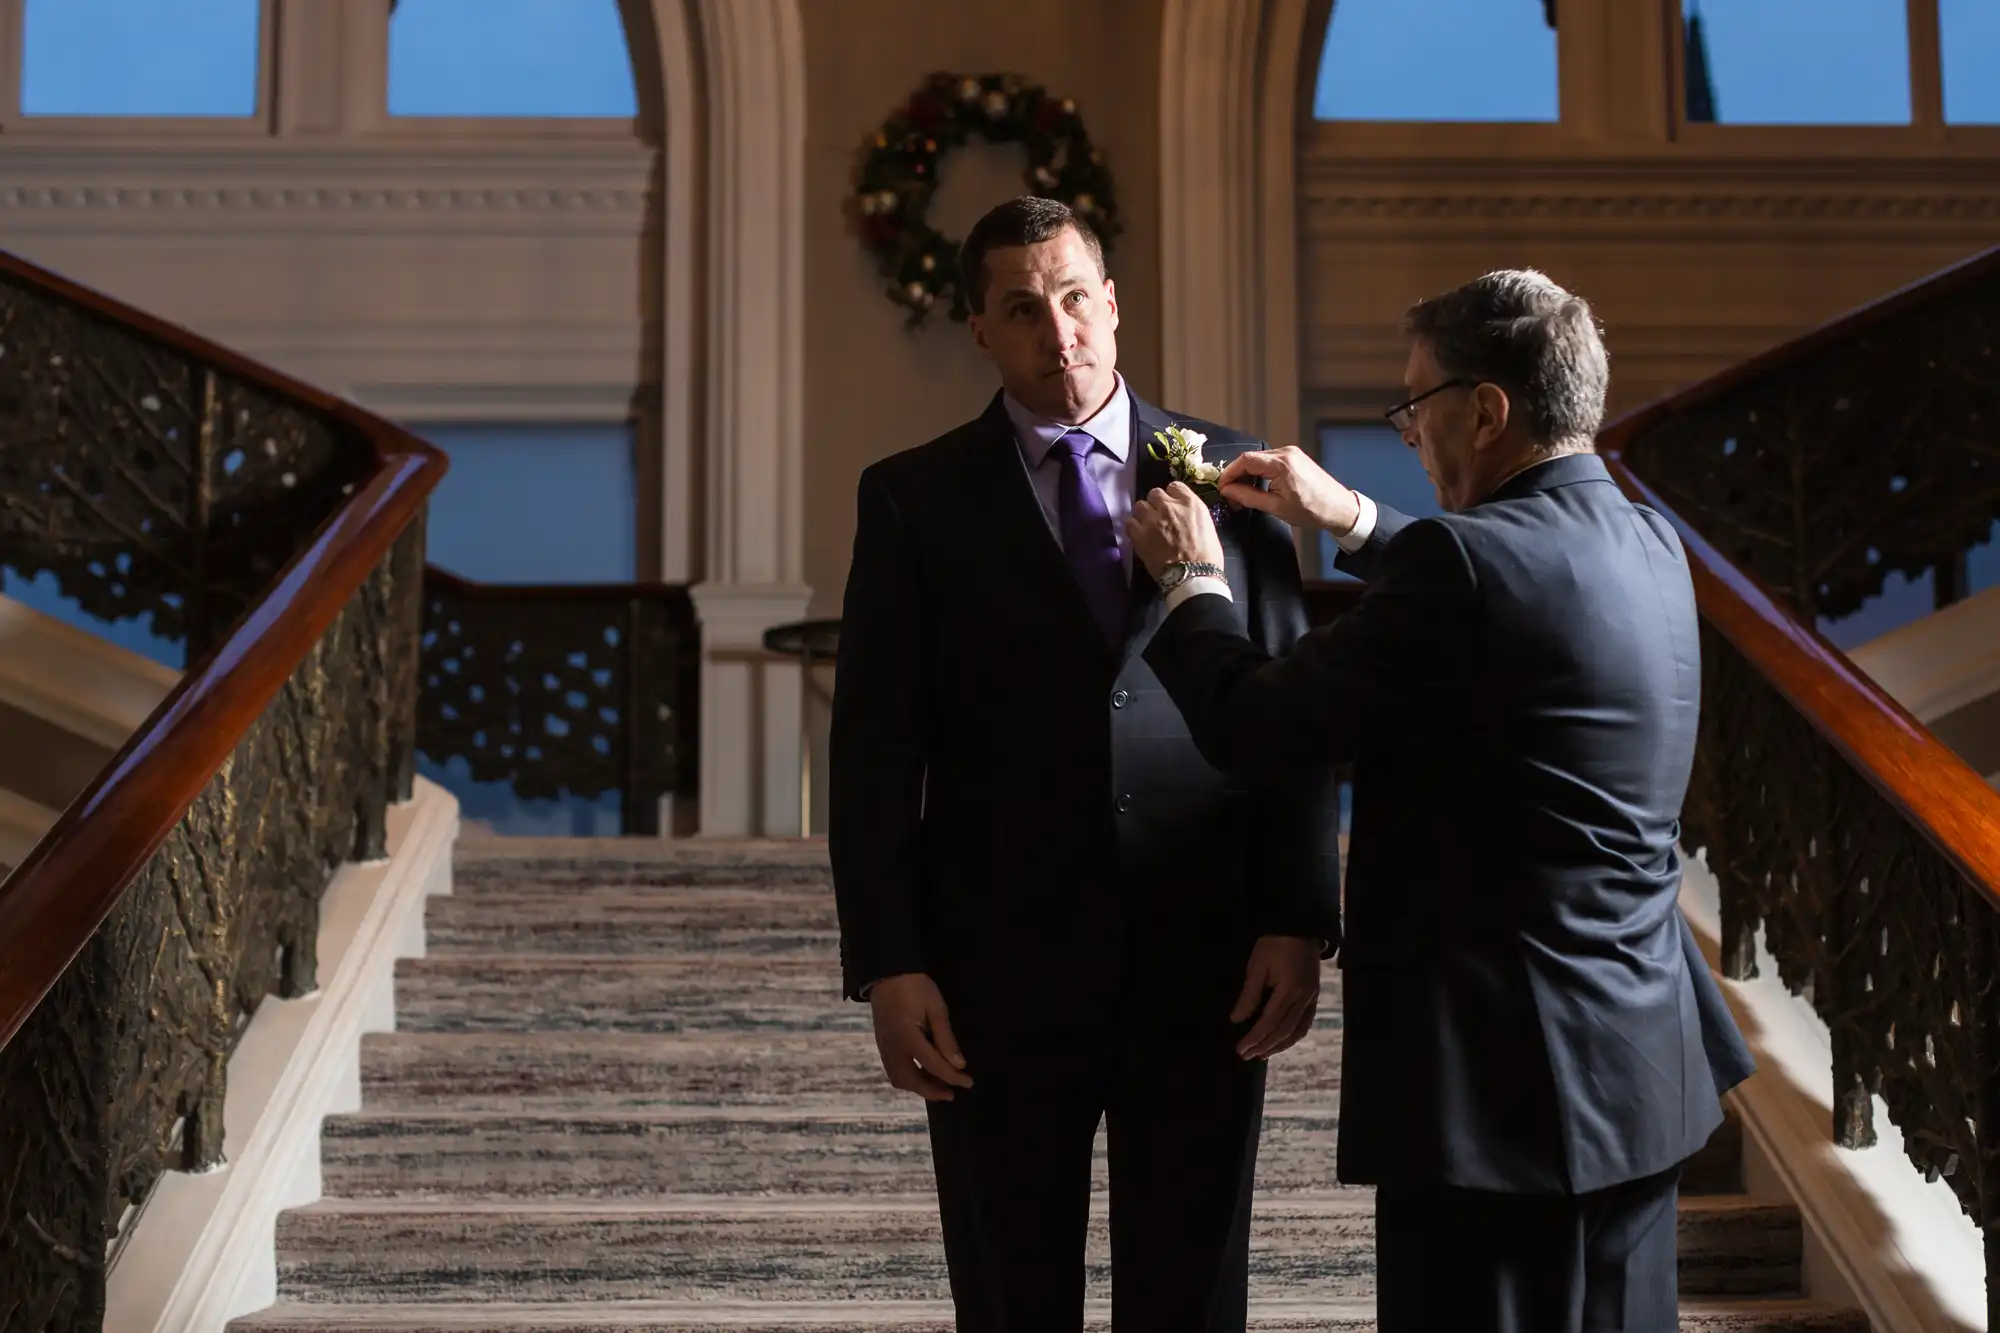 An older man fixes a boutonniere on a younger man's suit jacket in an elegant staircase hall adorned with a christmas wreath.